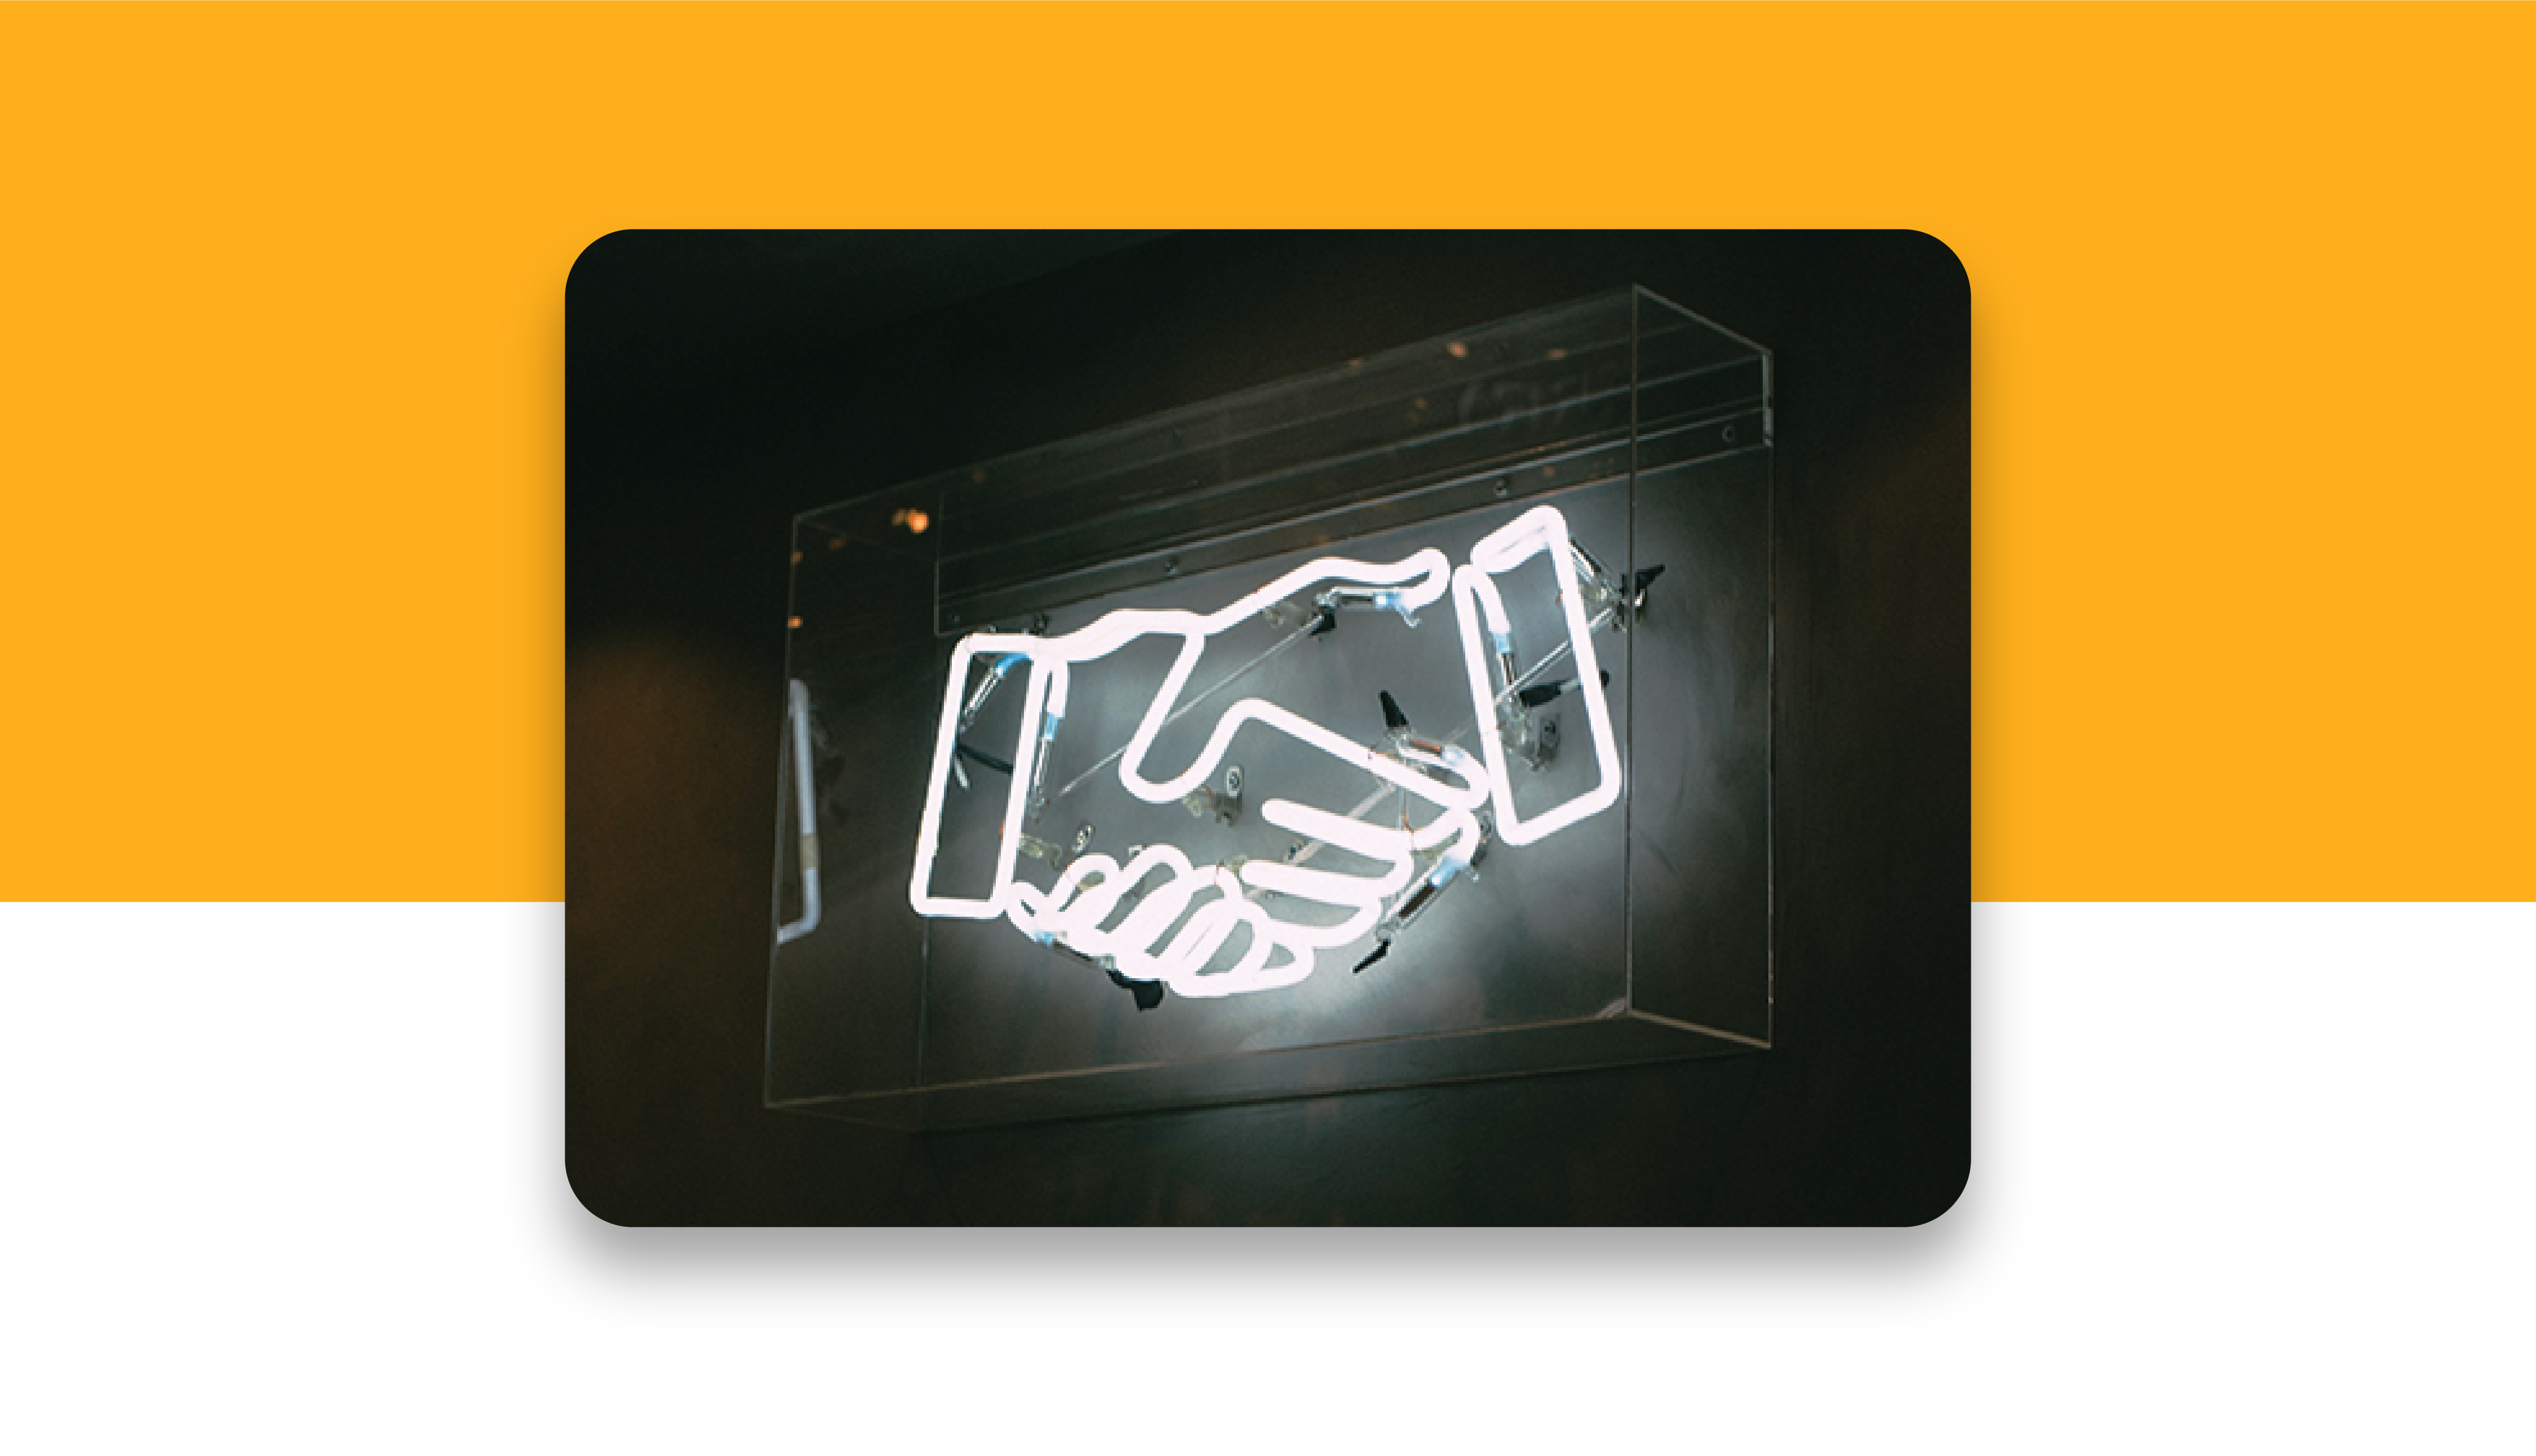 Neon sign displaying a hand shake with a yellow block of color in the background